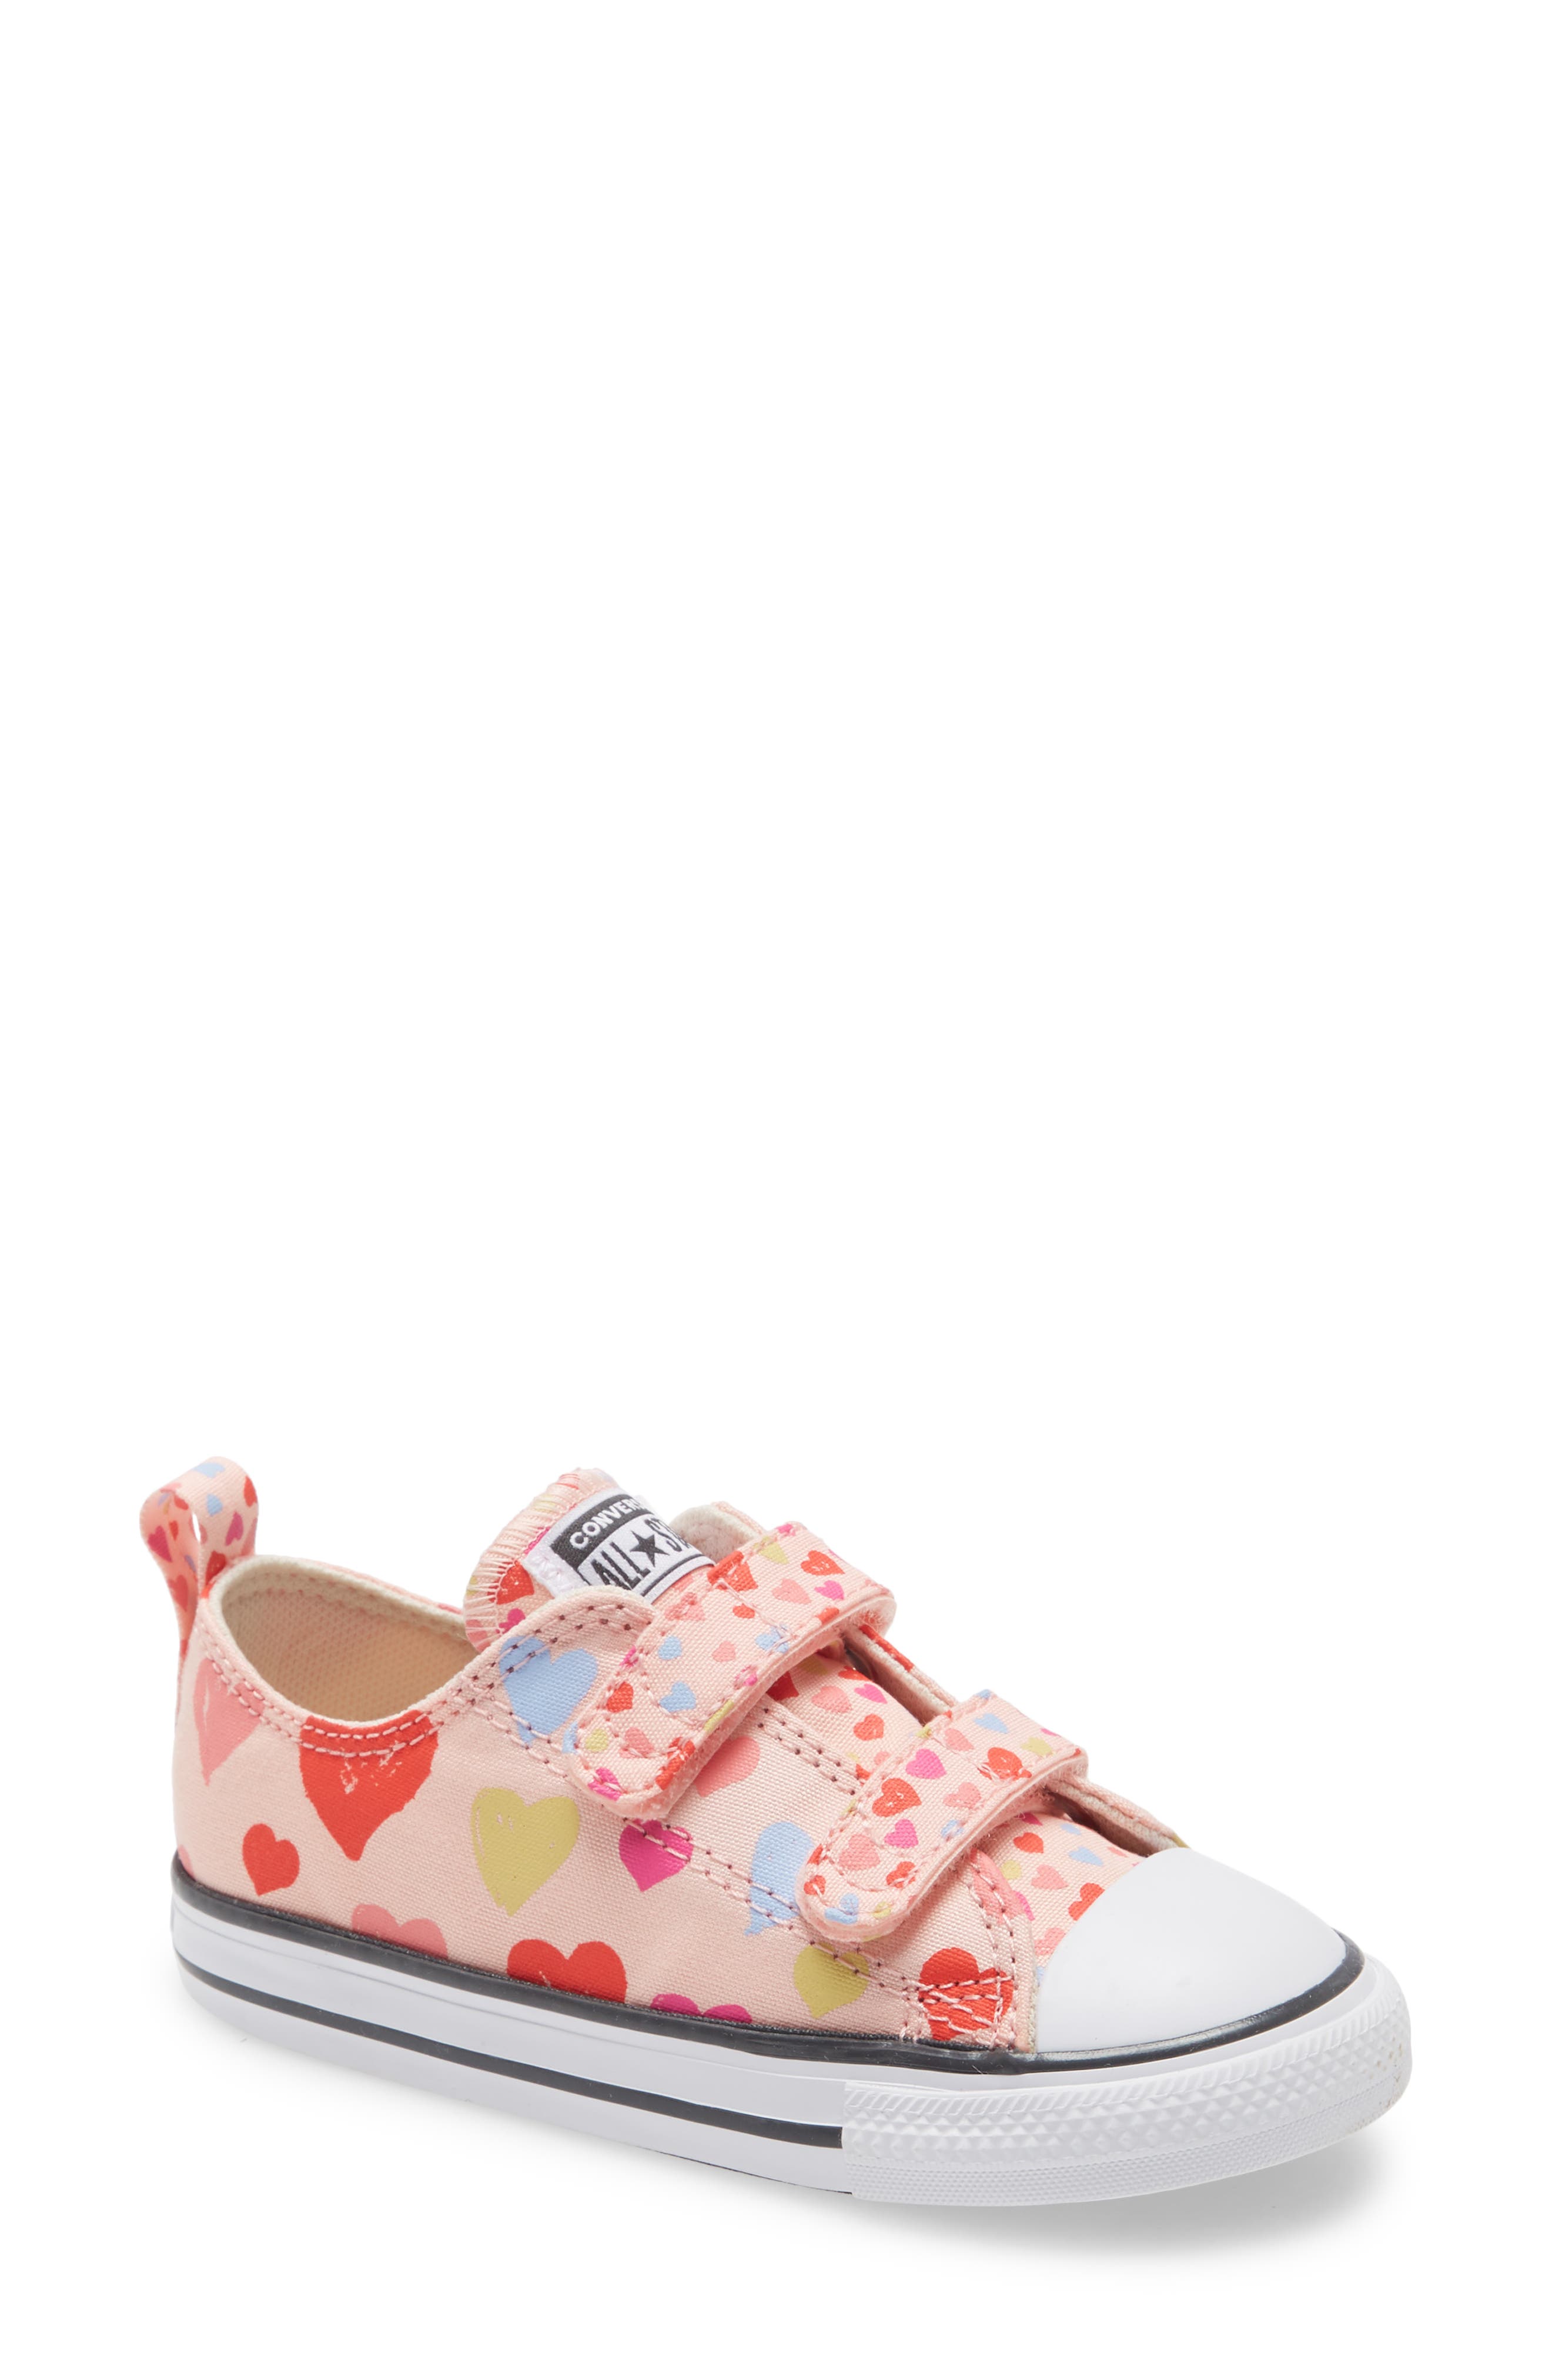 baby girl all star converse